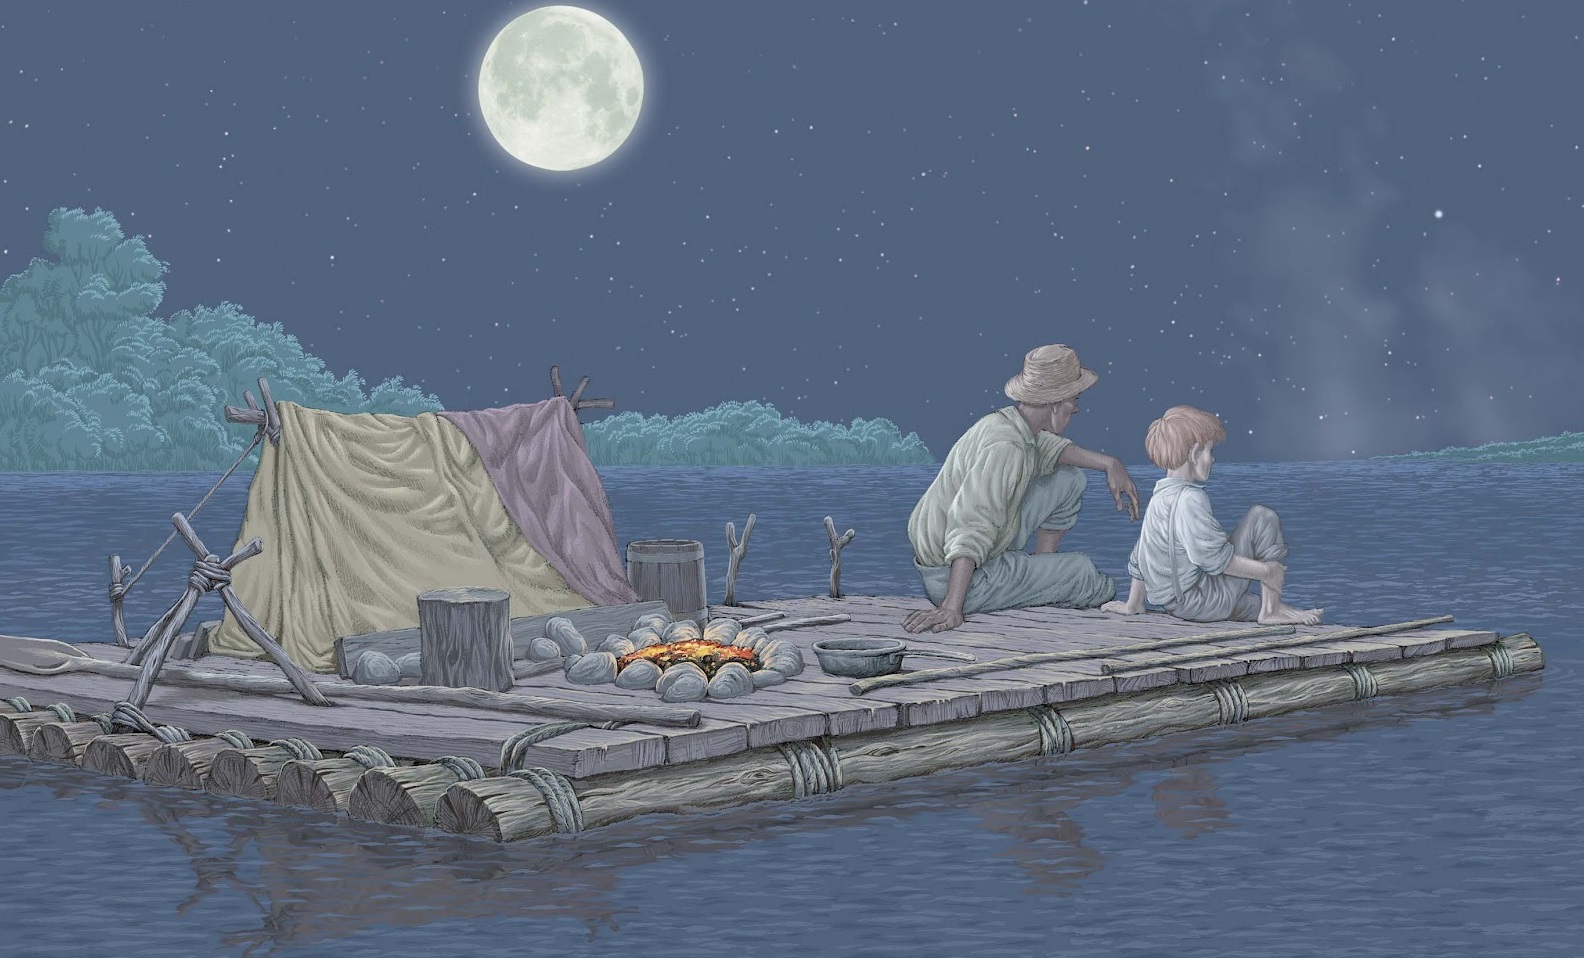 Can You Beat Your BFF in This General Knowledge Quiz? Adventures of Huckleberry Finn